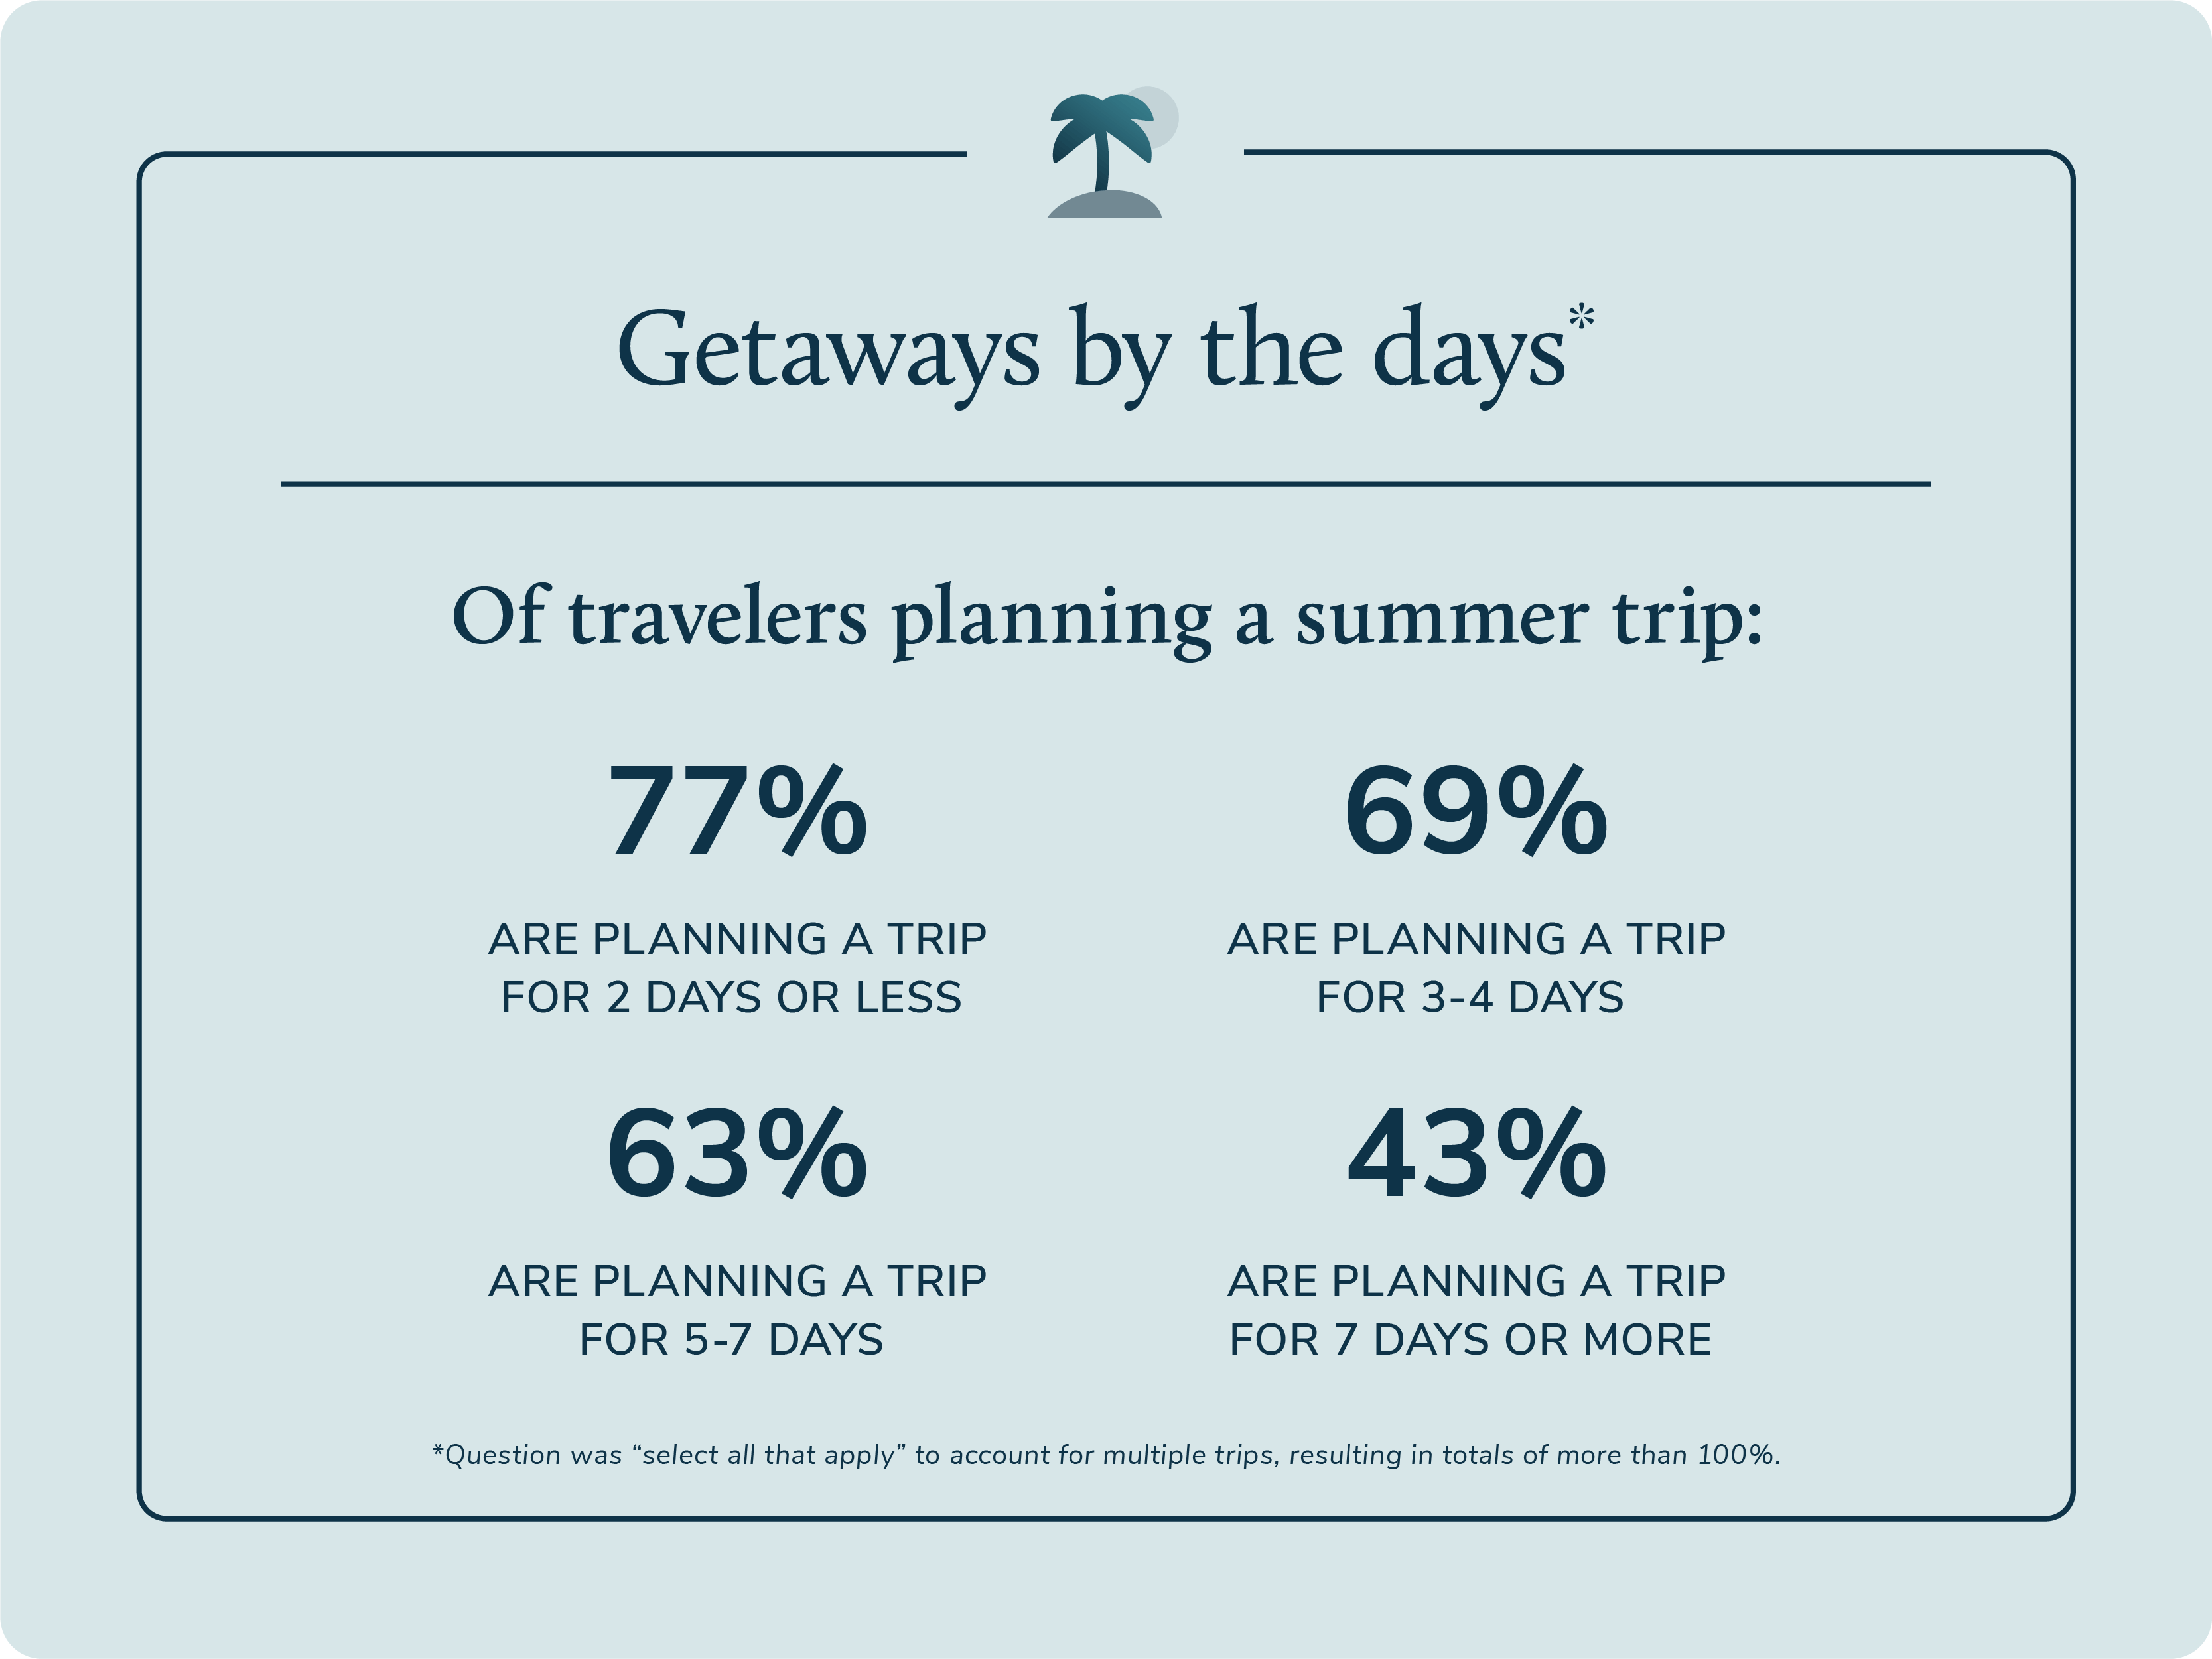 Getaways and travel trends for summer 2023 by days.